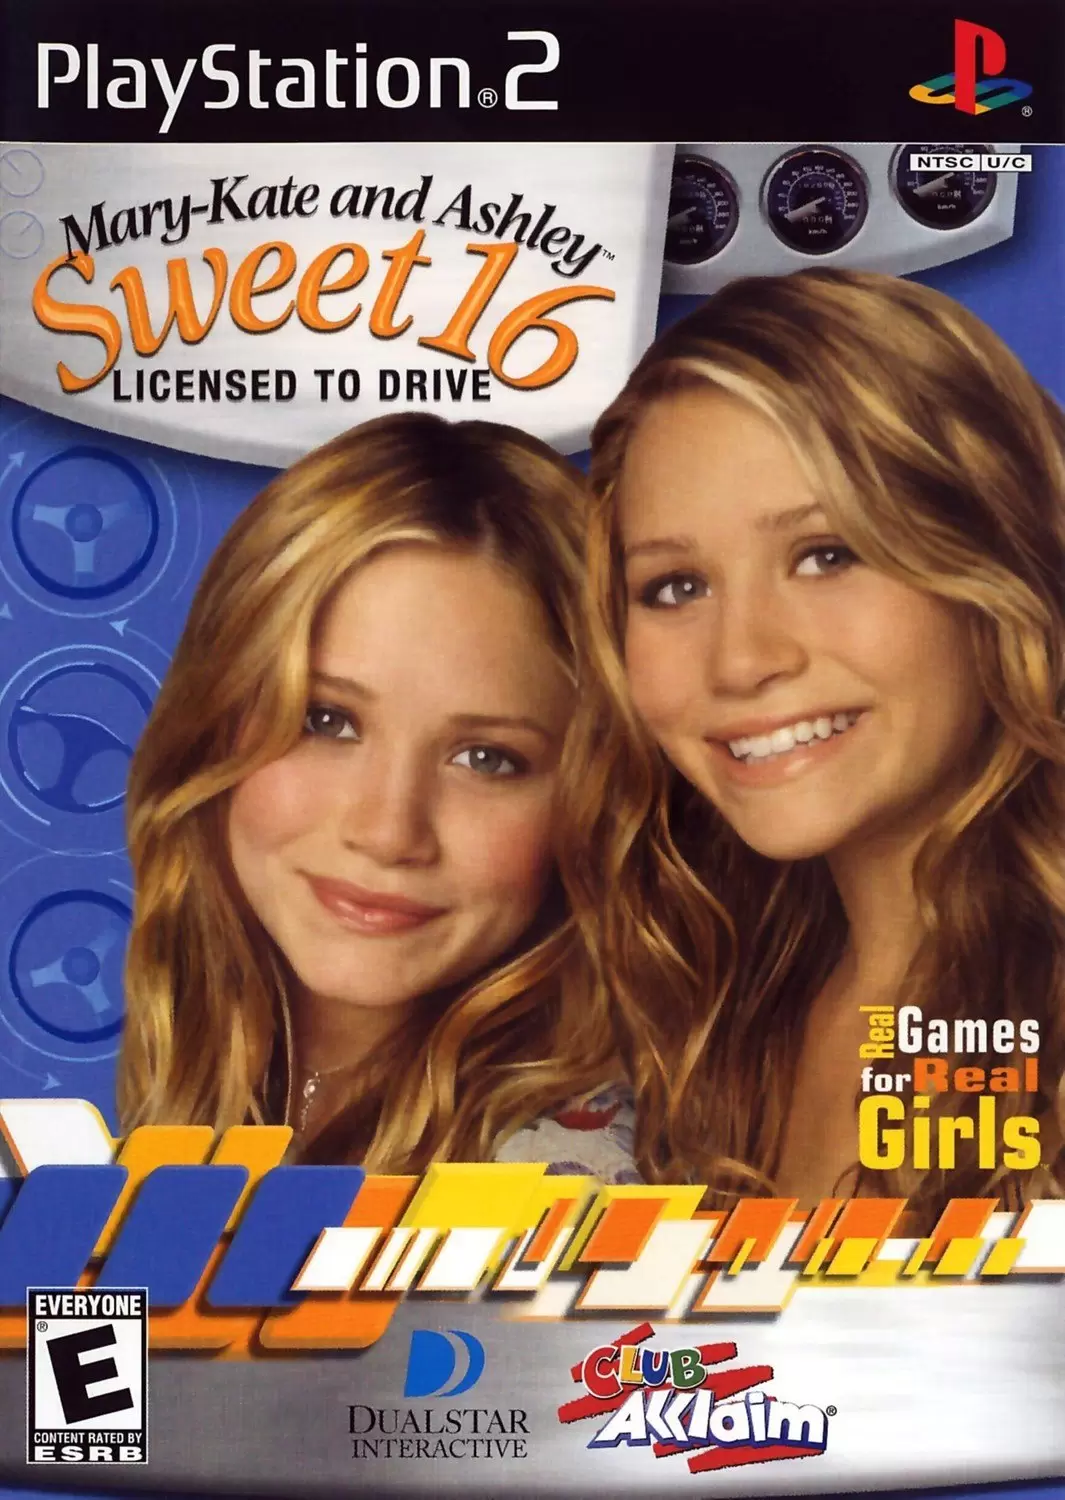 PS2 Games - Mary-Kate And Ashley: Sweet 16